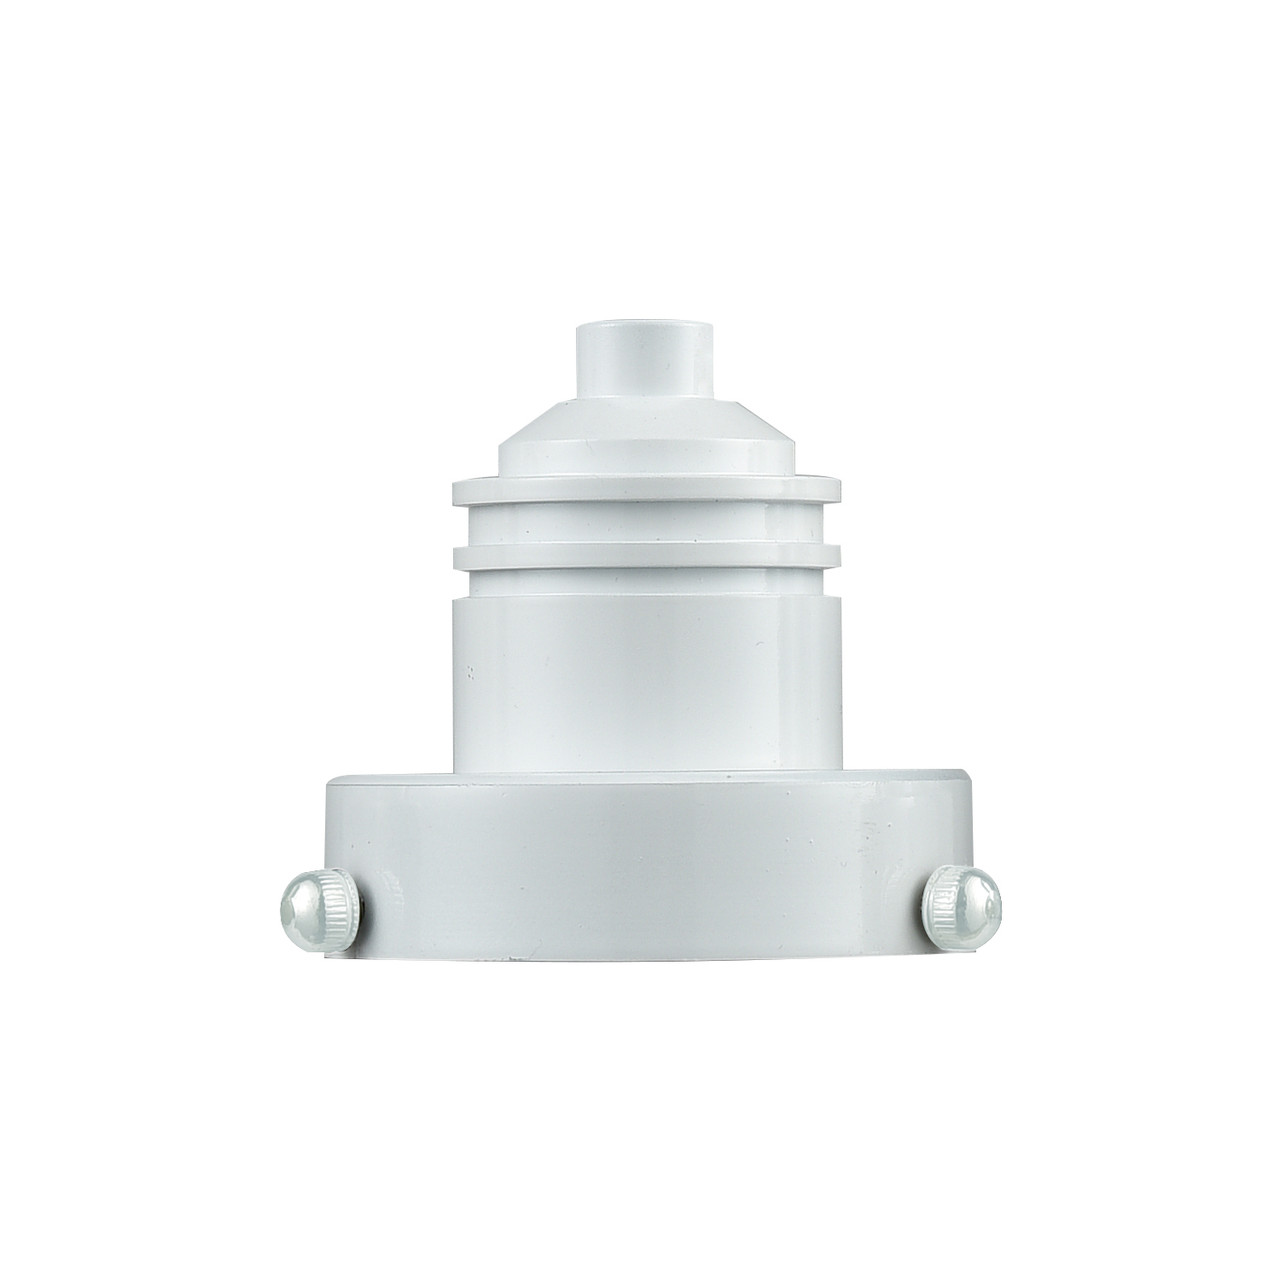 INNOVATIONS 002H-W Winchester 2 inch Socket Cover White